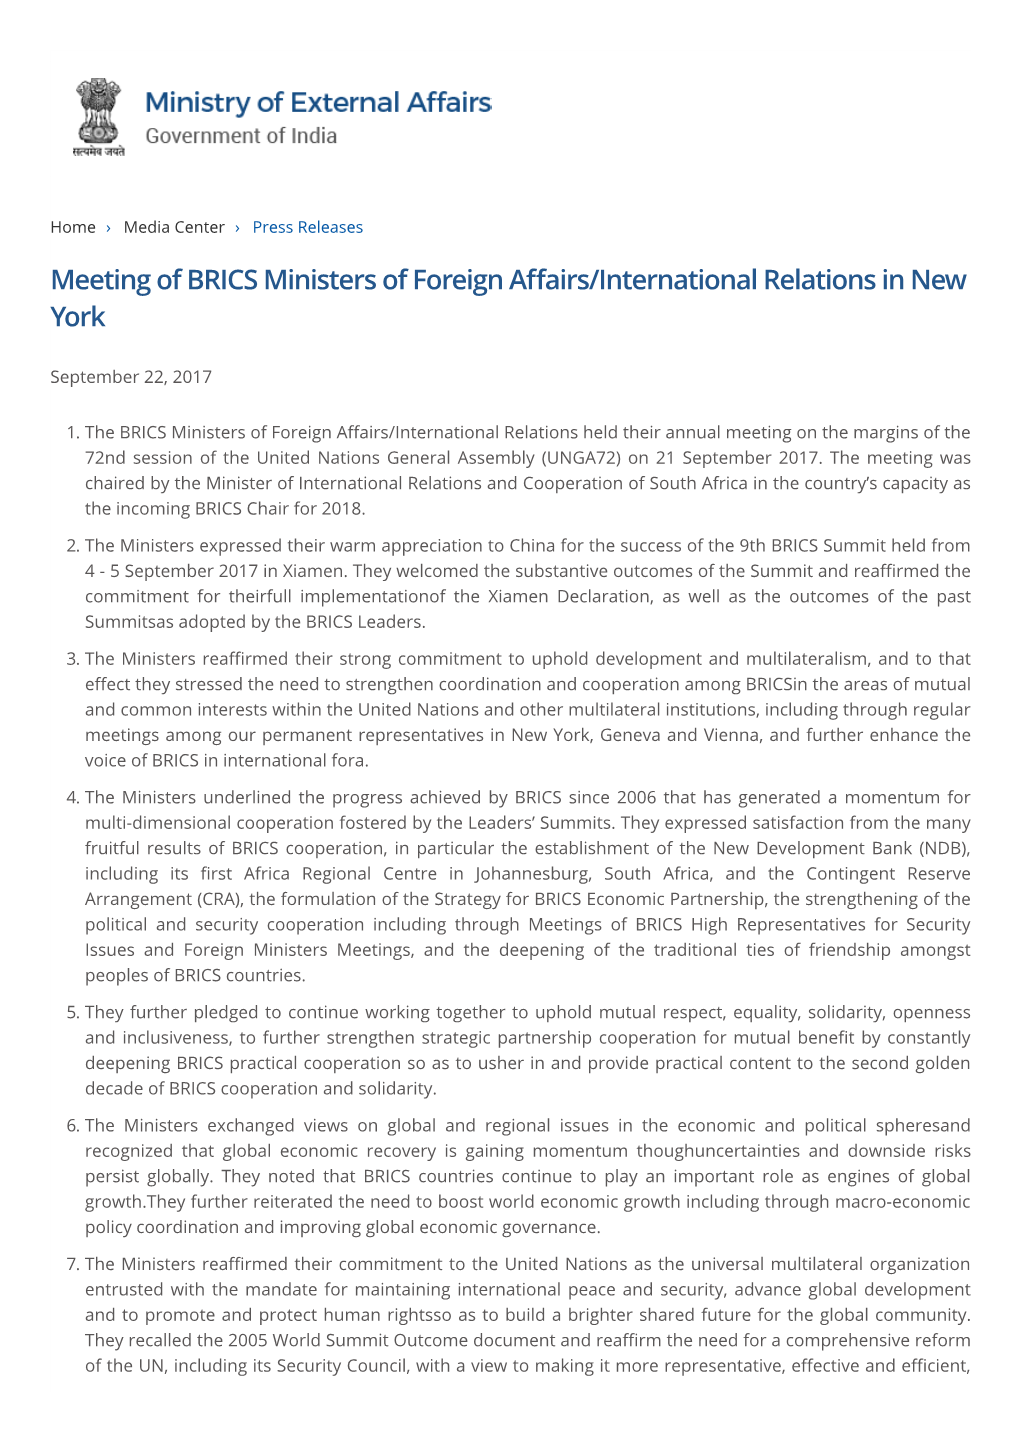 Meeting of BRICS Ministers of Foreign Affairs/International Relations In